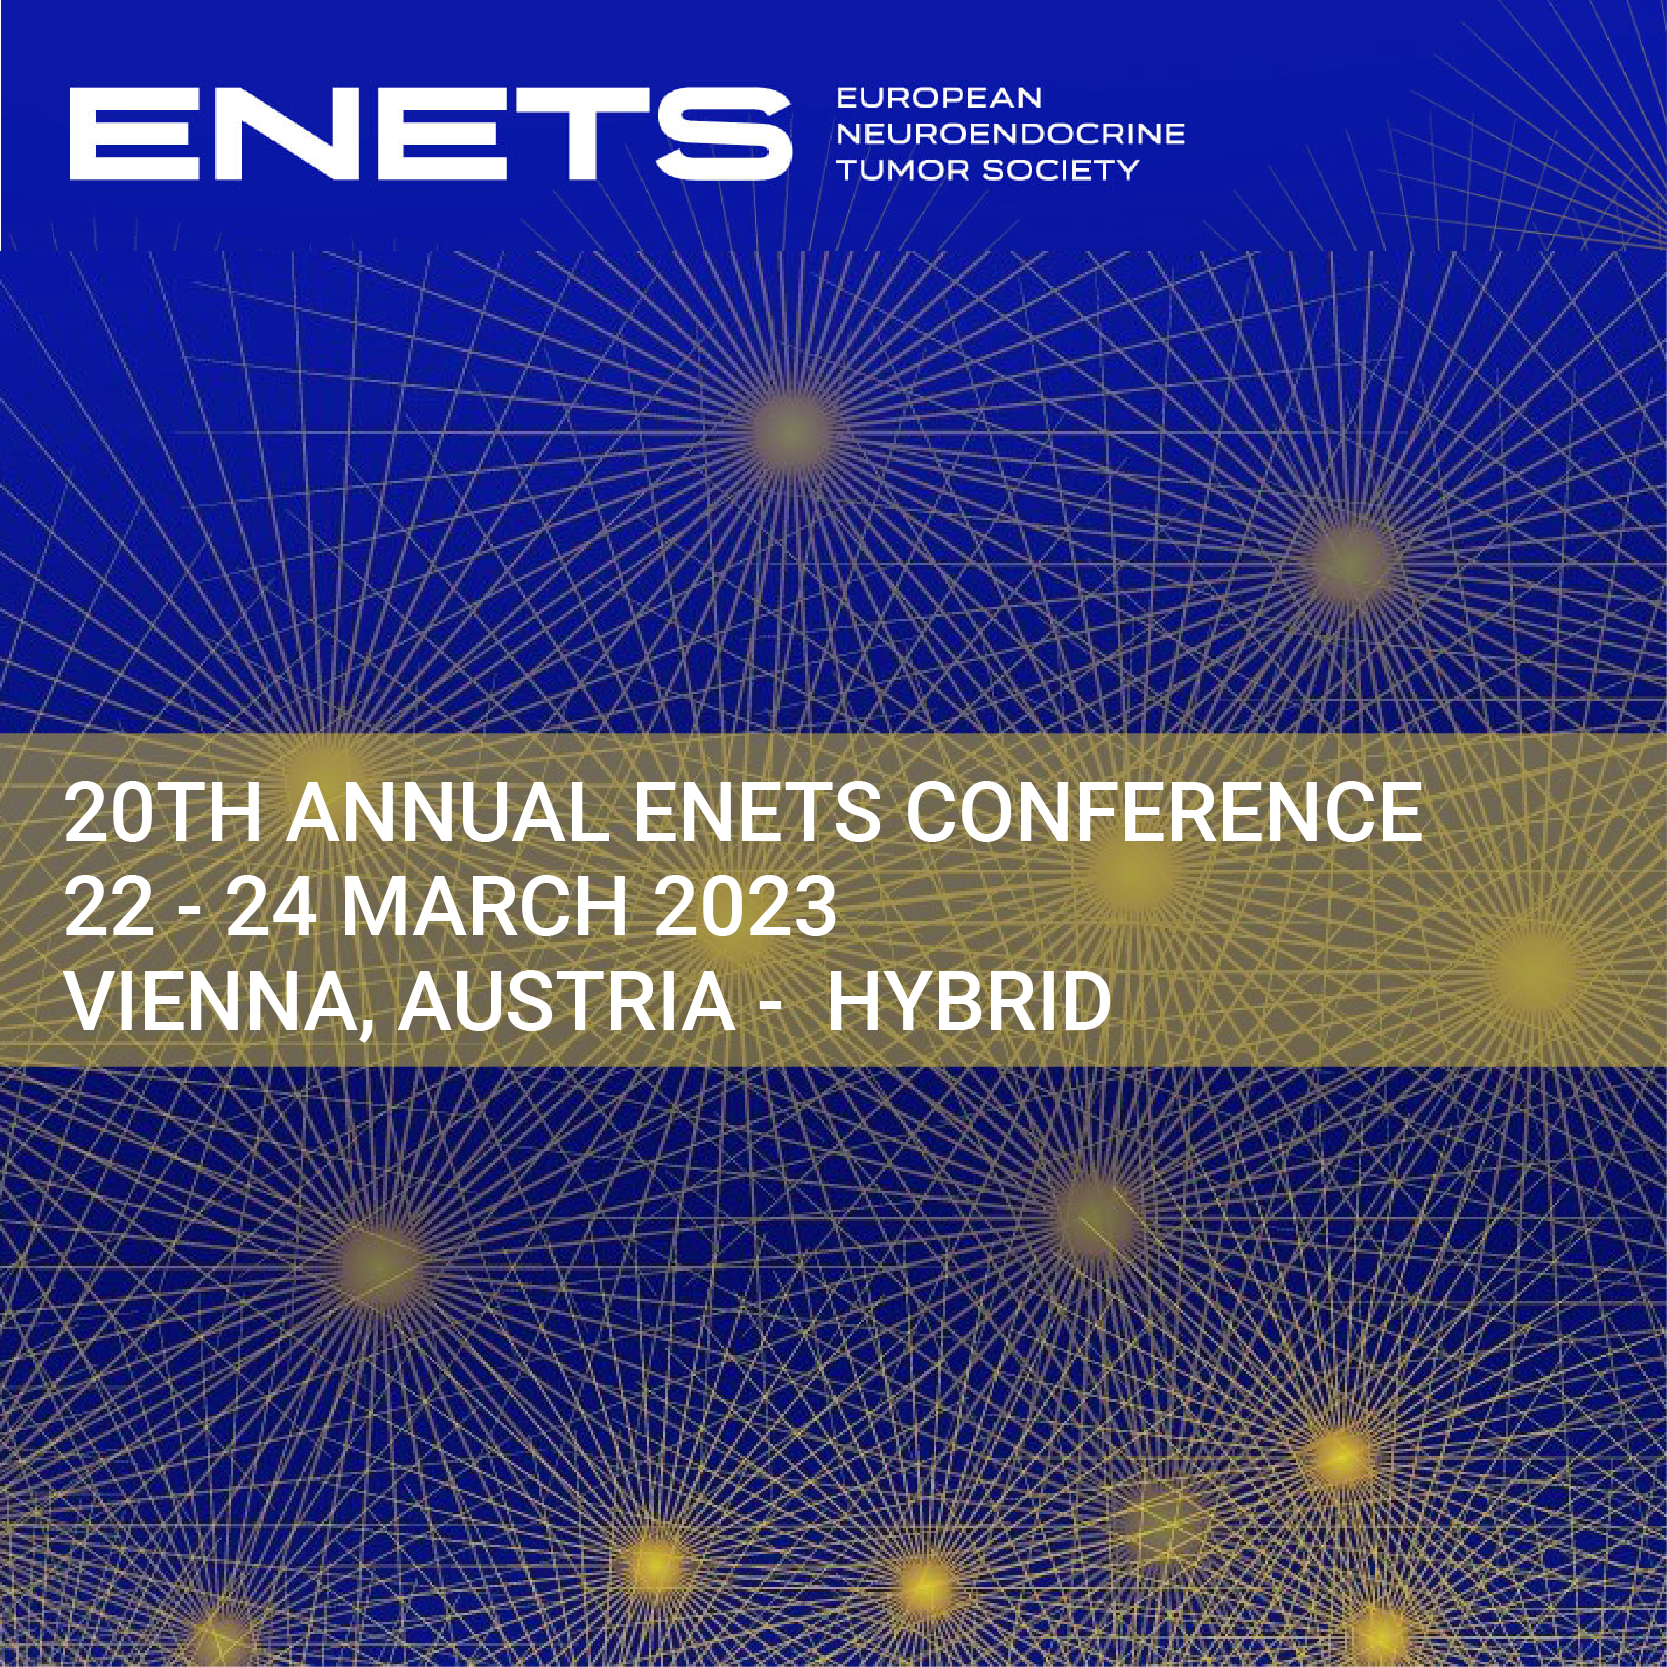 THE 20TH ANNUAL ENETS CONFERENCE - ENETS 2023